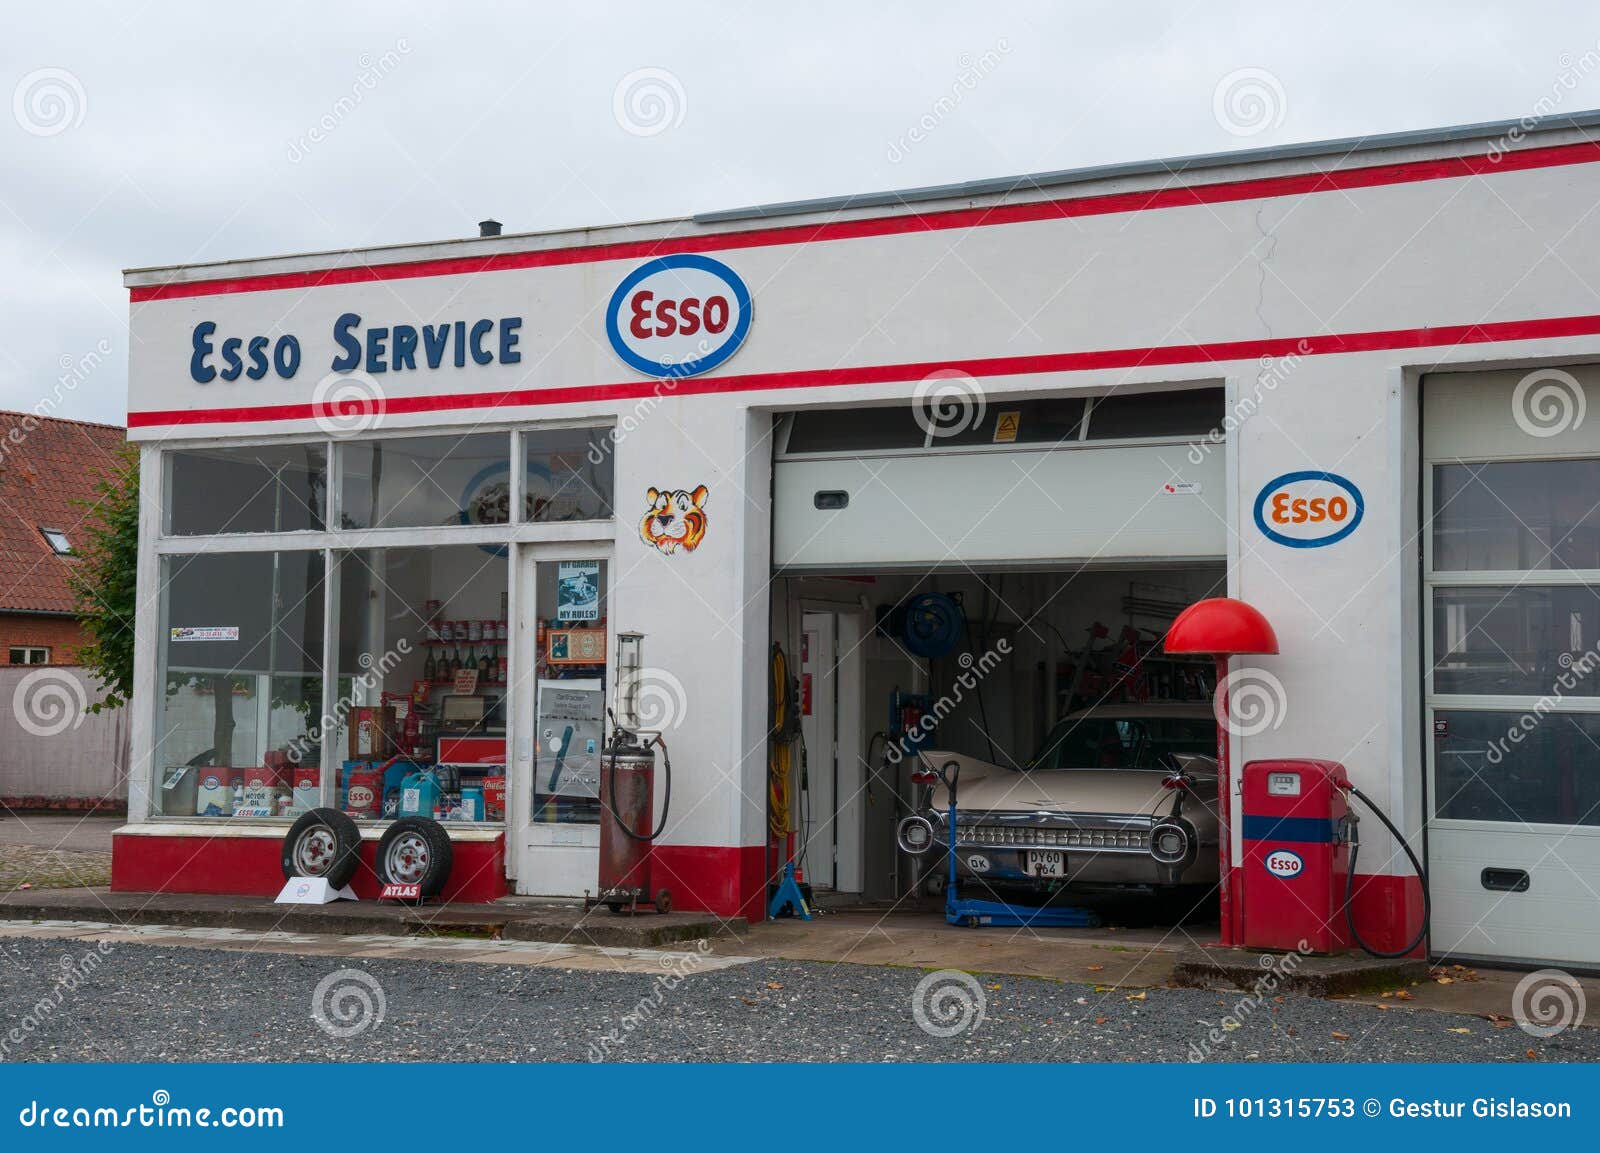 How Much Does A Car Wash Cost At Esso - Esso Adelaide Car Wash